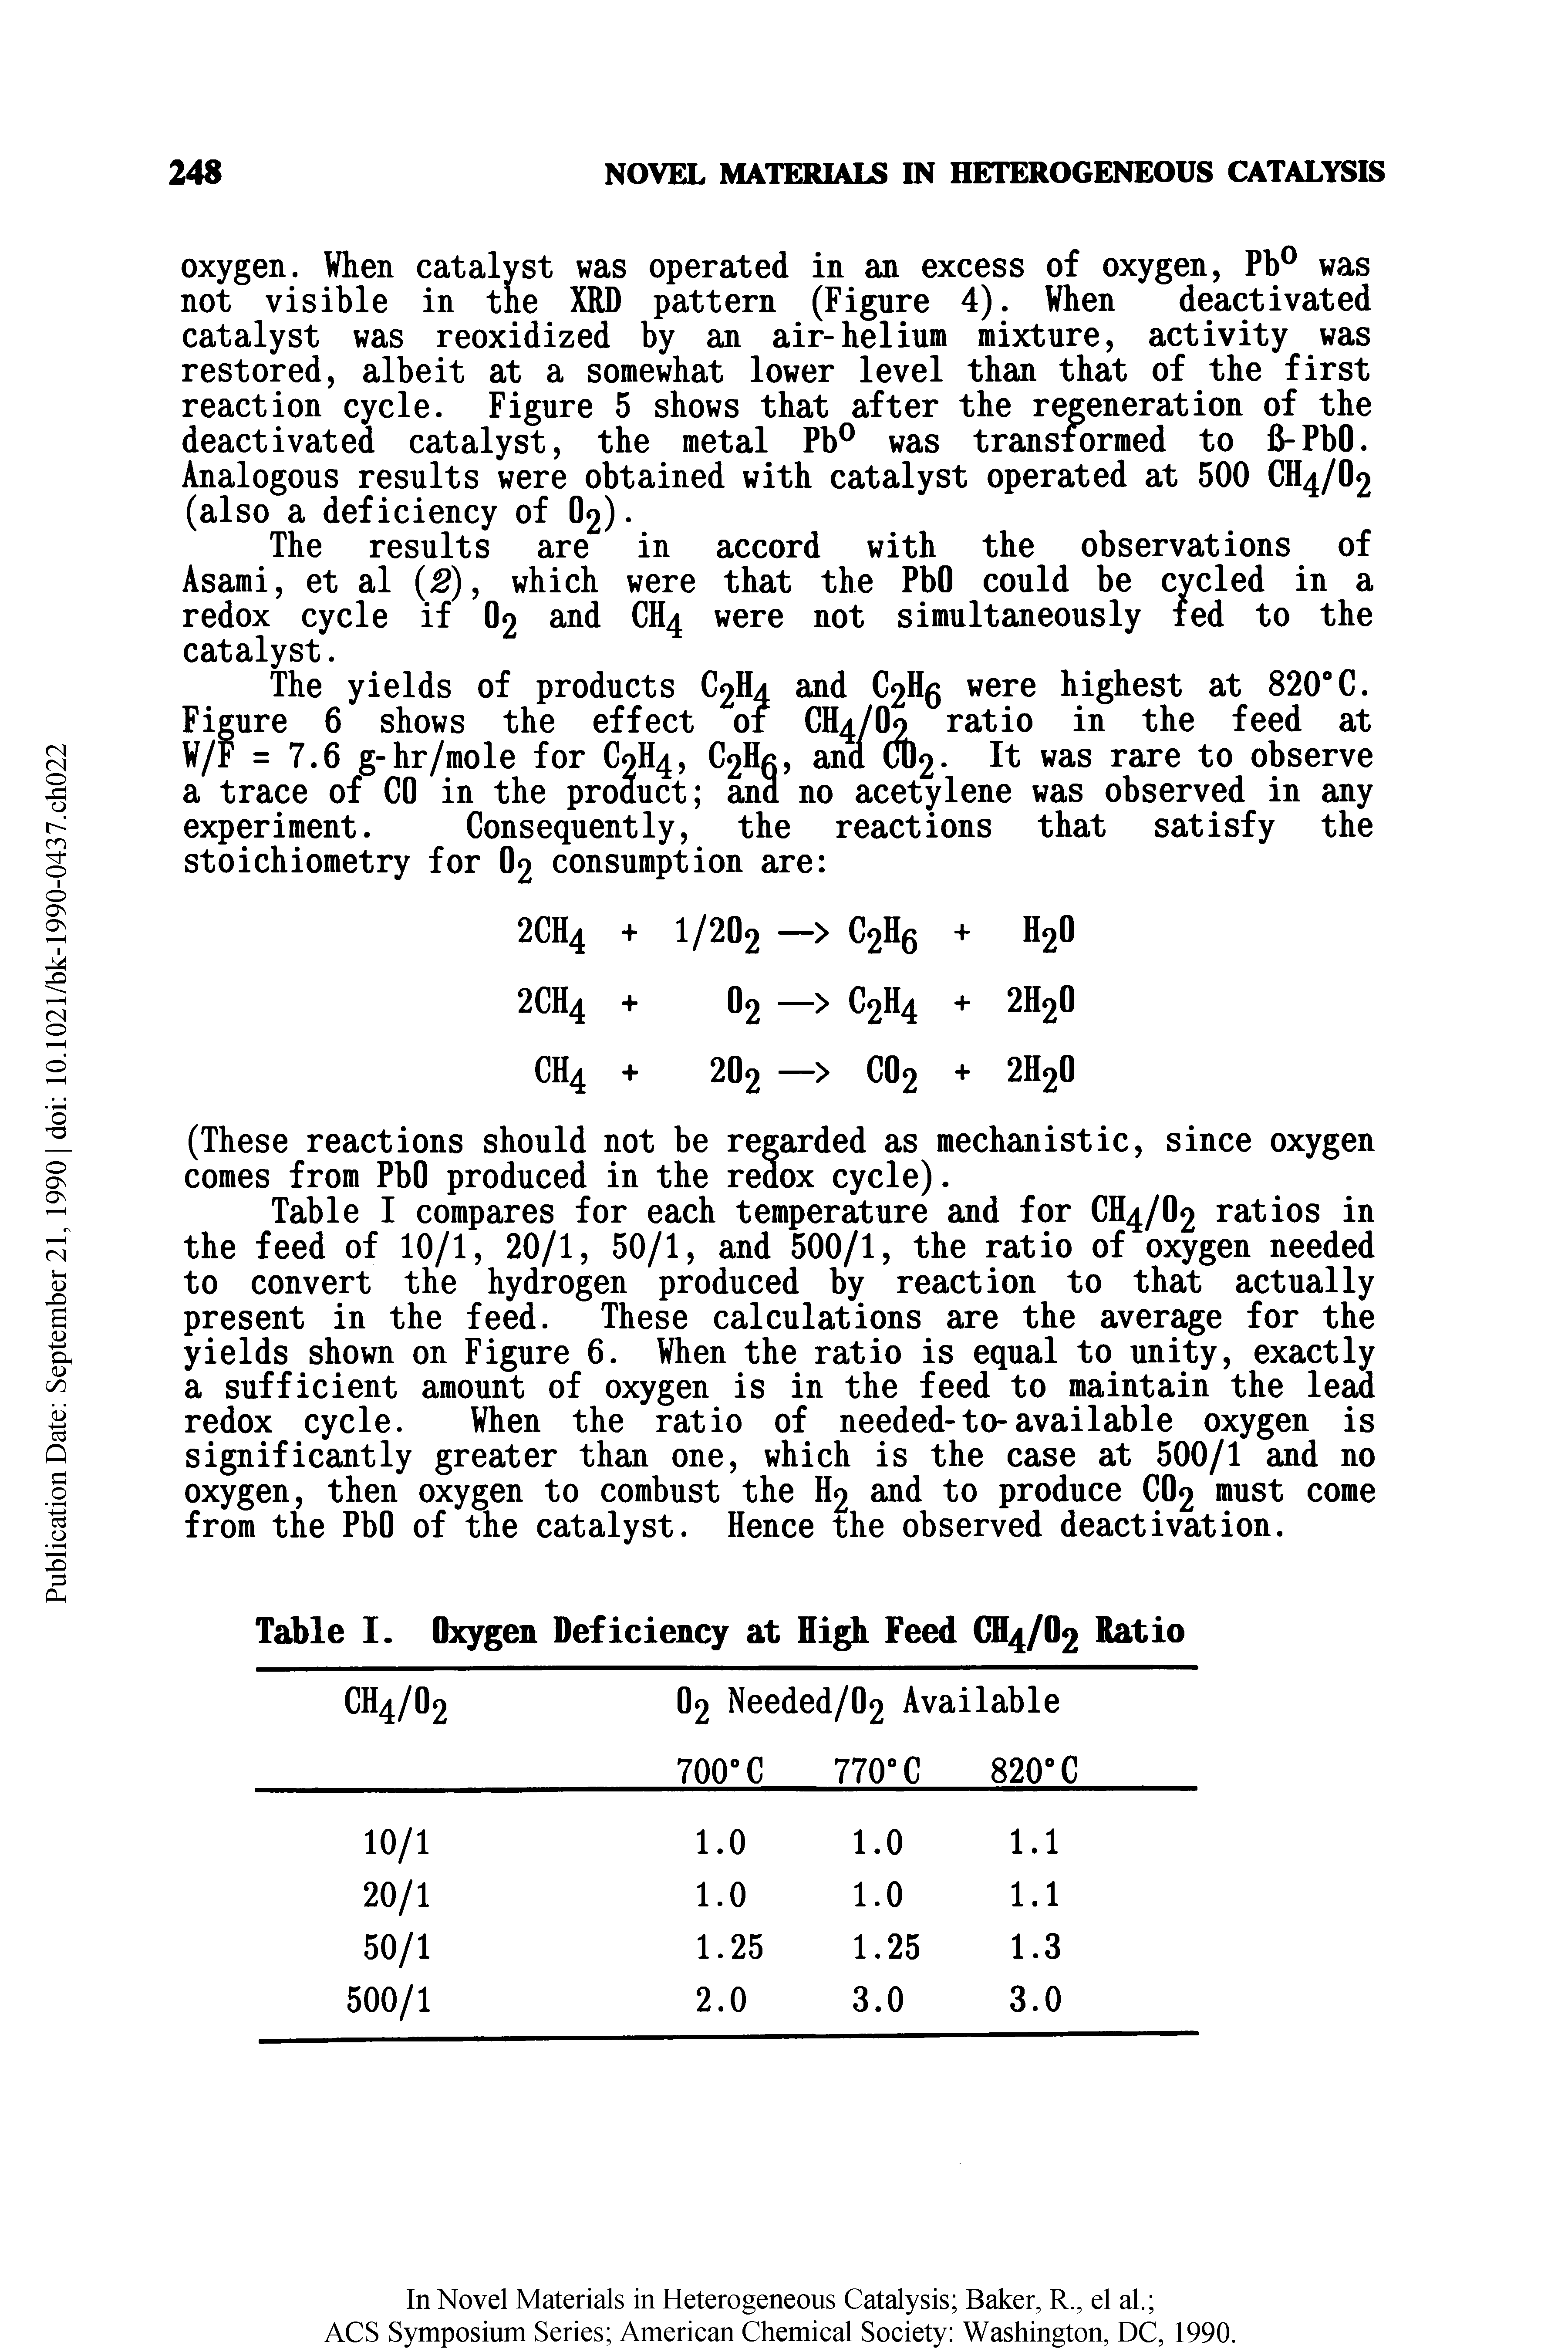 Table I compares for each temperature and for CH4/O2 ratios in the feed of 10/1, 20/1, 50/1, and 500/1, the ratio of oxygen needed to convert the hydrogen produced by reaction to that actually present in the feed. These calculations are the average for the yields shown on Figure 6. When the ratio is equal to unity, exactly a sufficient amount of oxygen is in the feed to maintain the lead redox cycle. When the ratio of needed-to-available oxygen is significantly greater than one, which is the case at 500/1 and no oxygen, then oxygen to combust the H2 and to produce CO2 must come from the PbO of the catalyst. Hence the observed deactivation.